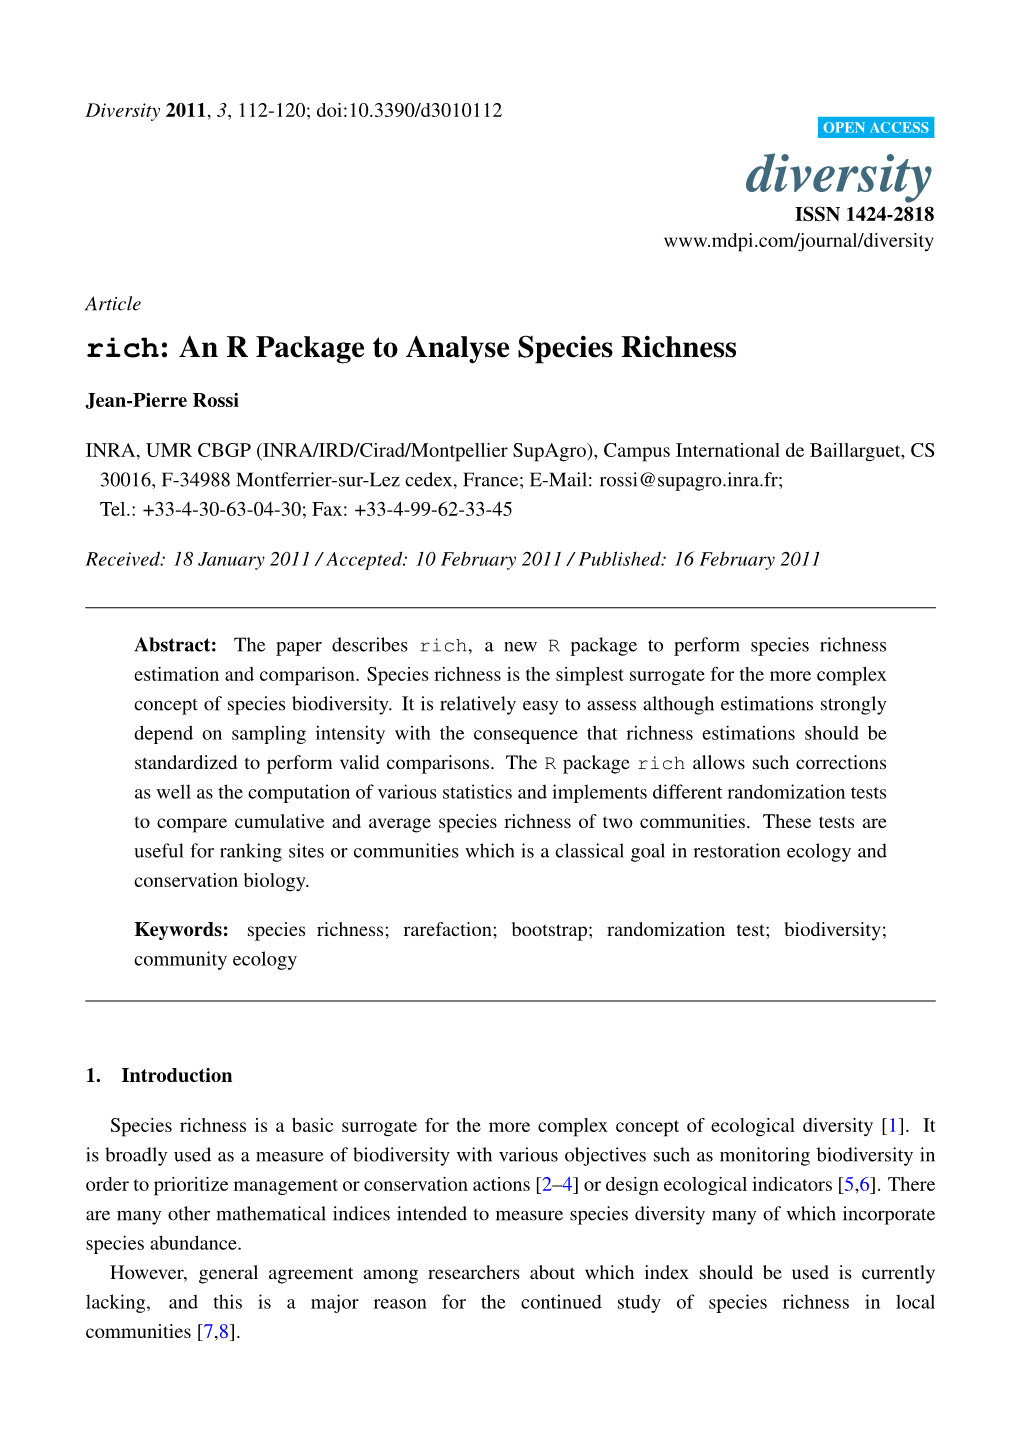 An R Package to Analyse Species Richness